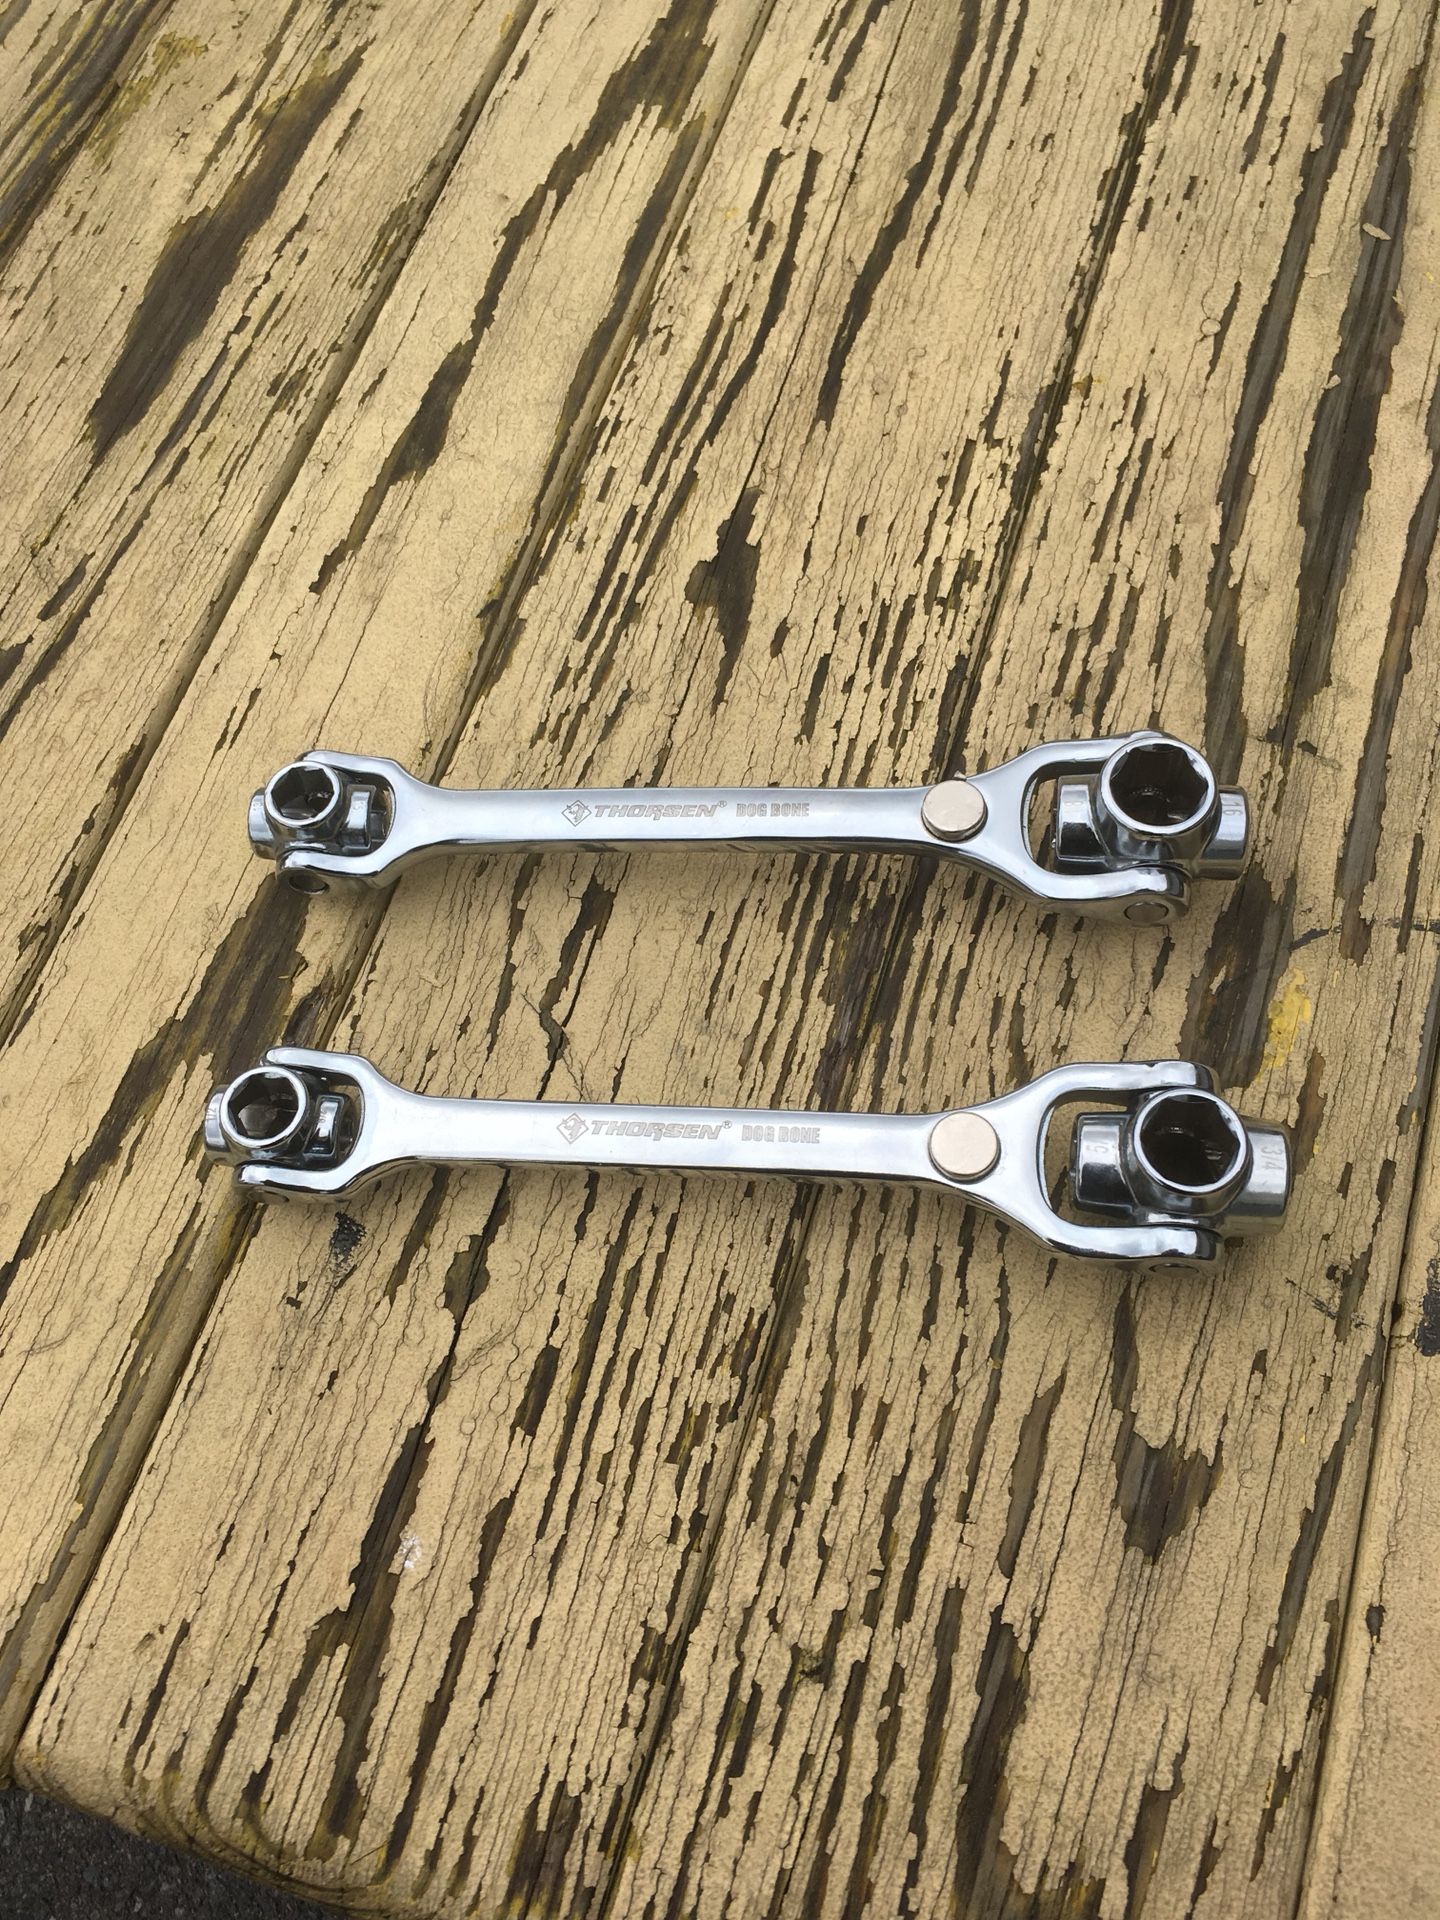 Two dogbone wrenches w magnets 8 sizes on each Metric and standard